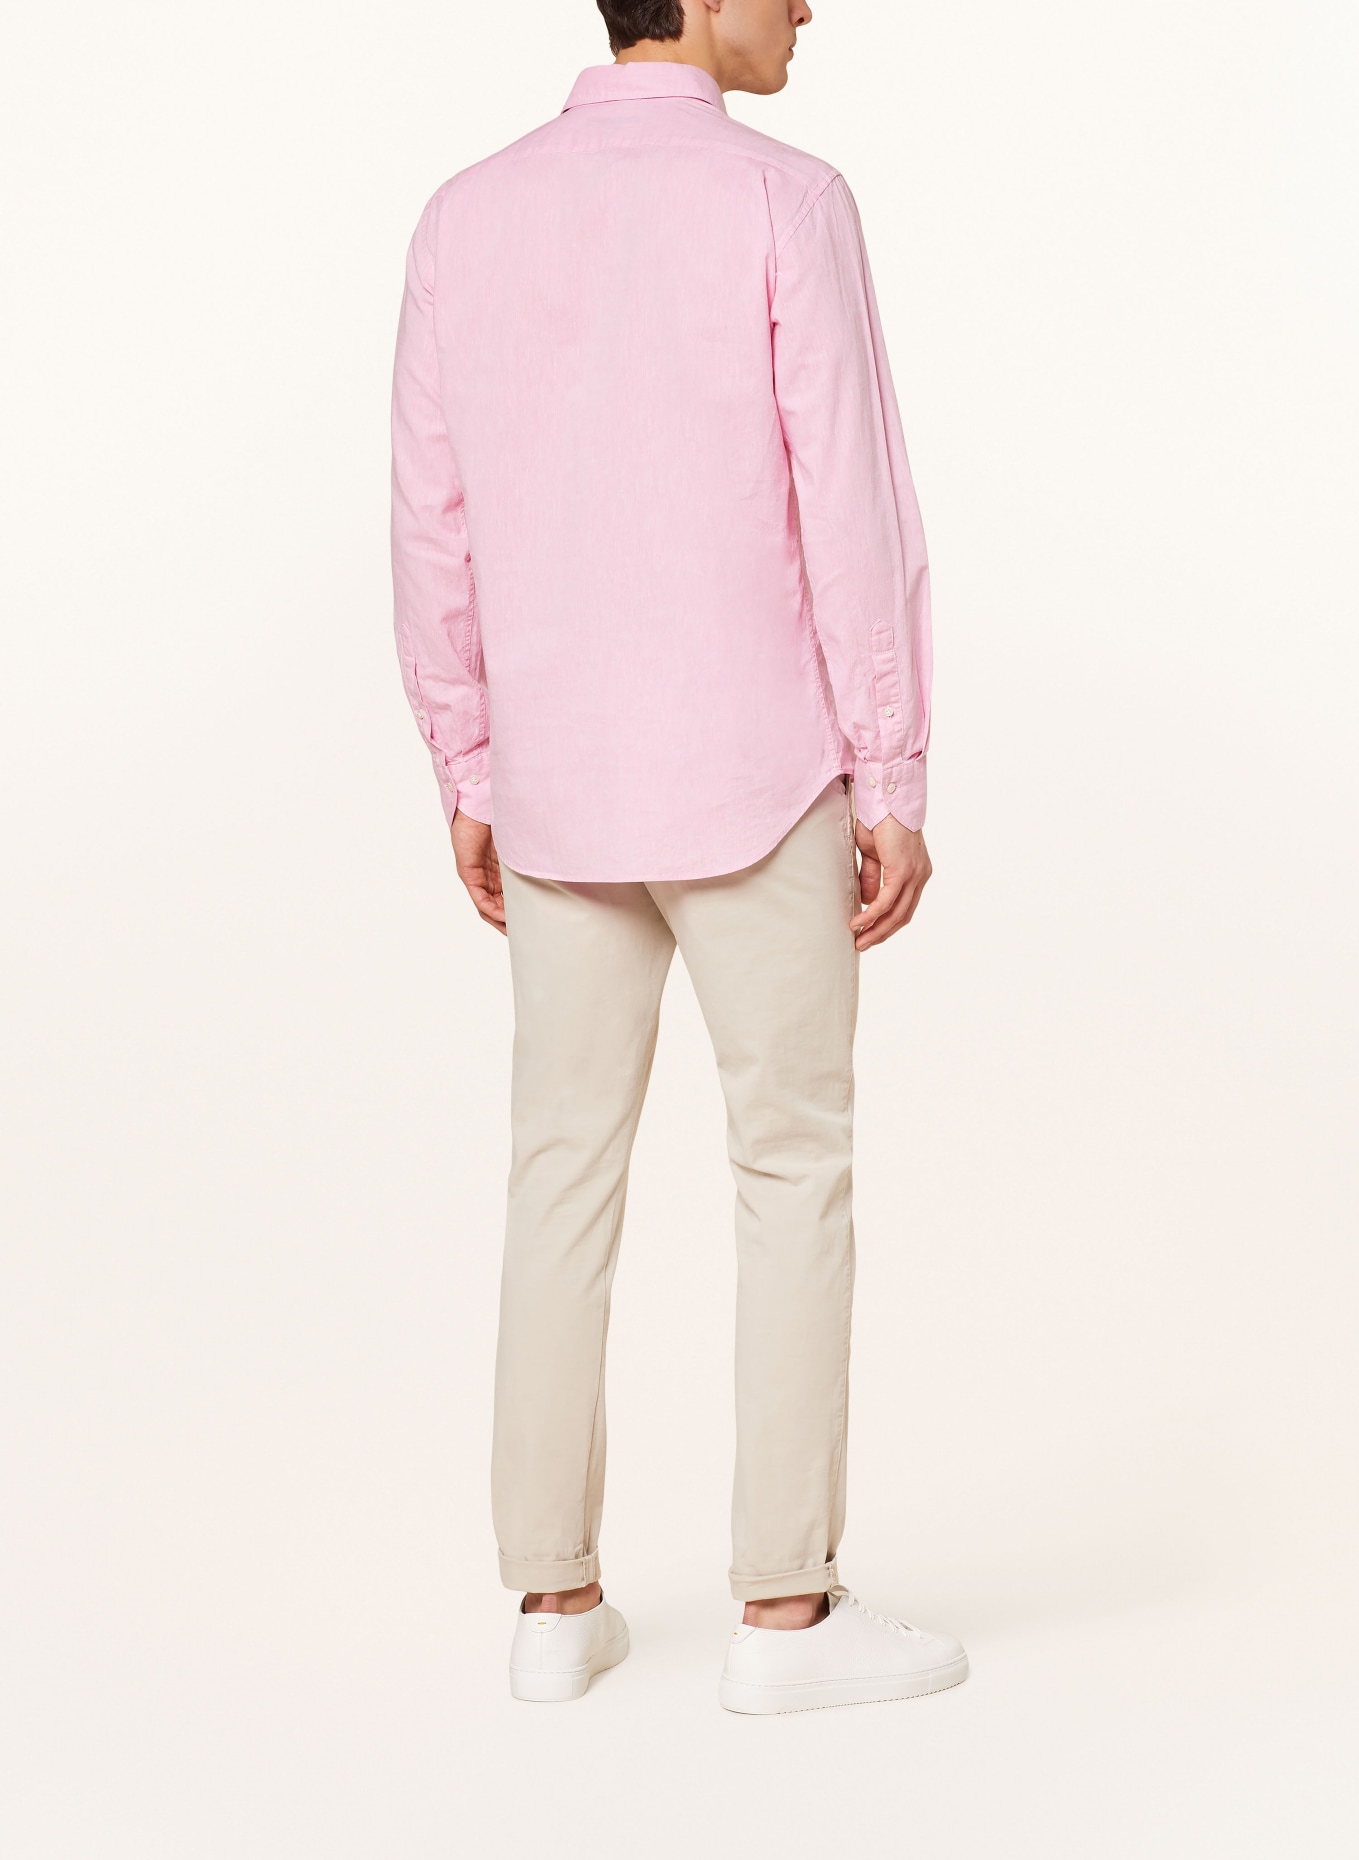 STROKESMAN'S Shirt regular fit with linen, Color: PINK (Image 3)